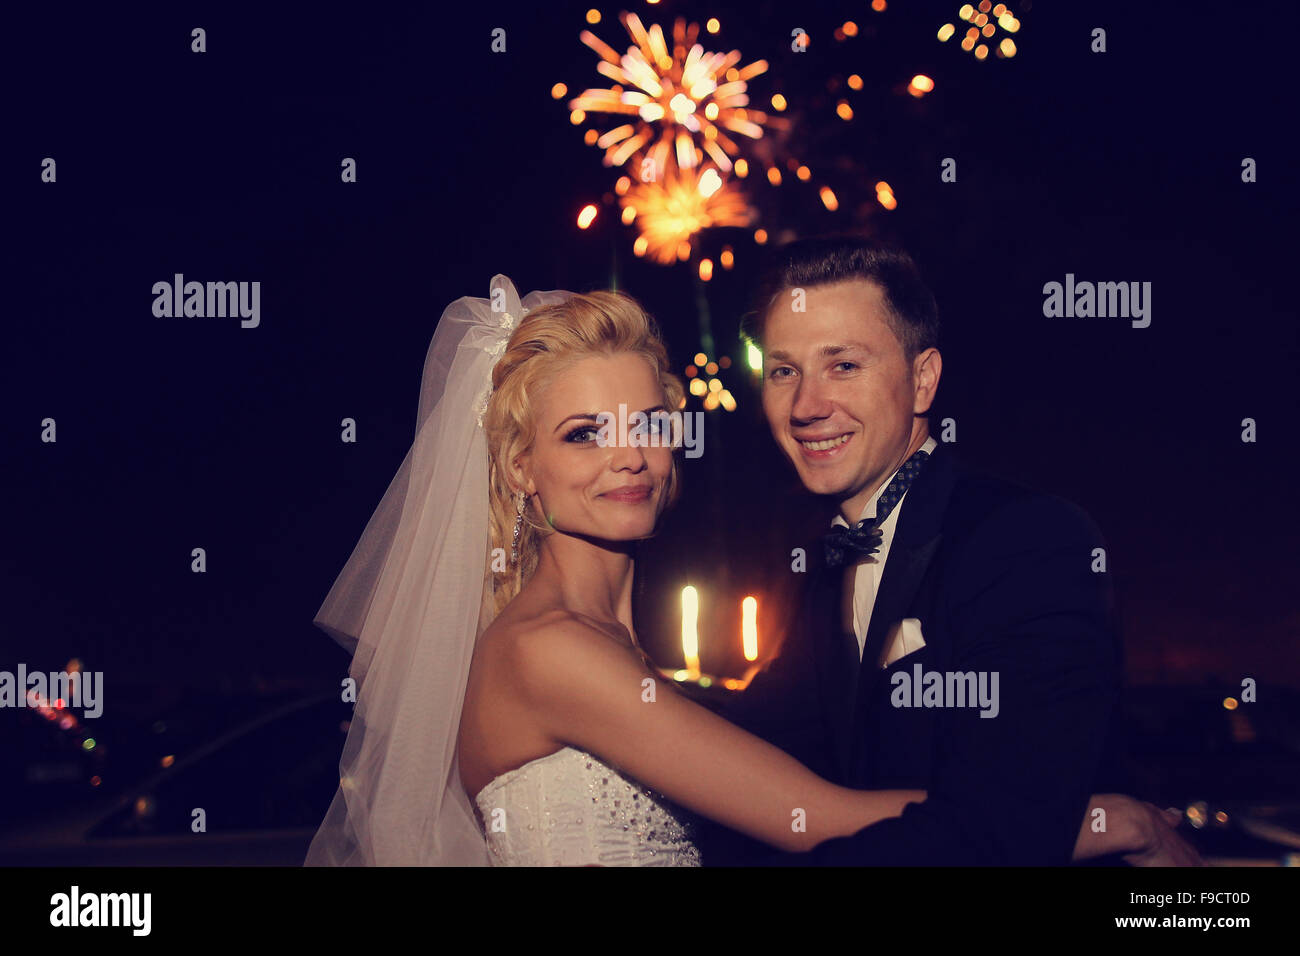 Beautiful bridal couple dancing sorrounded by fireworks Stock Photo